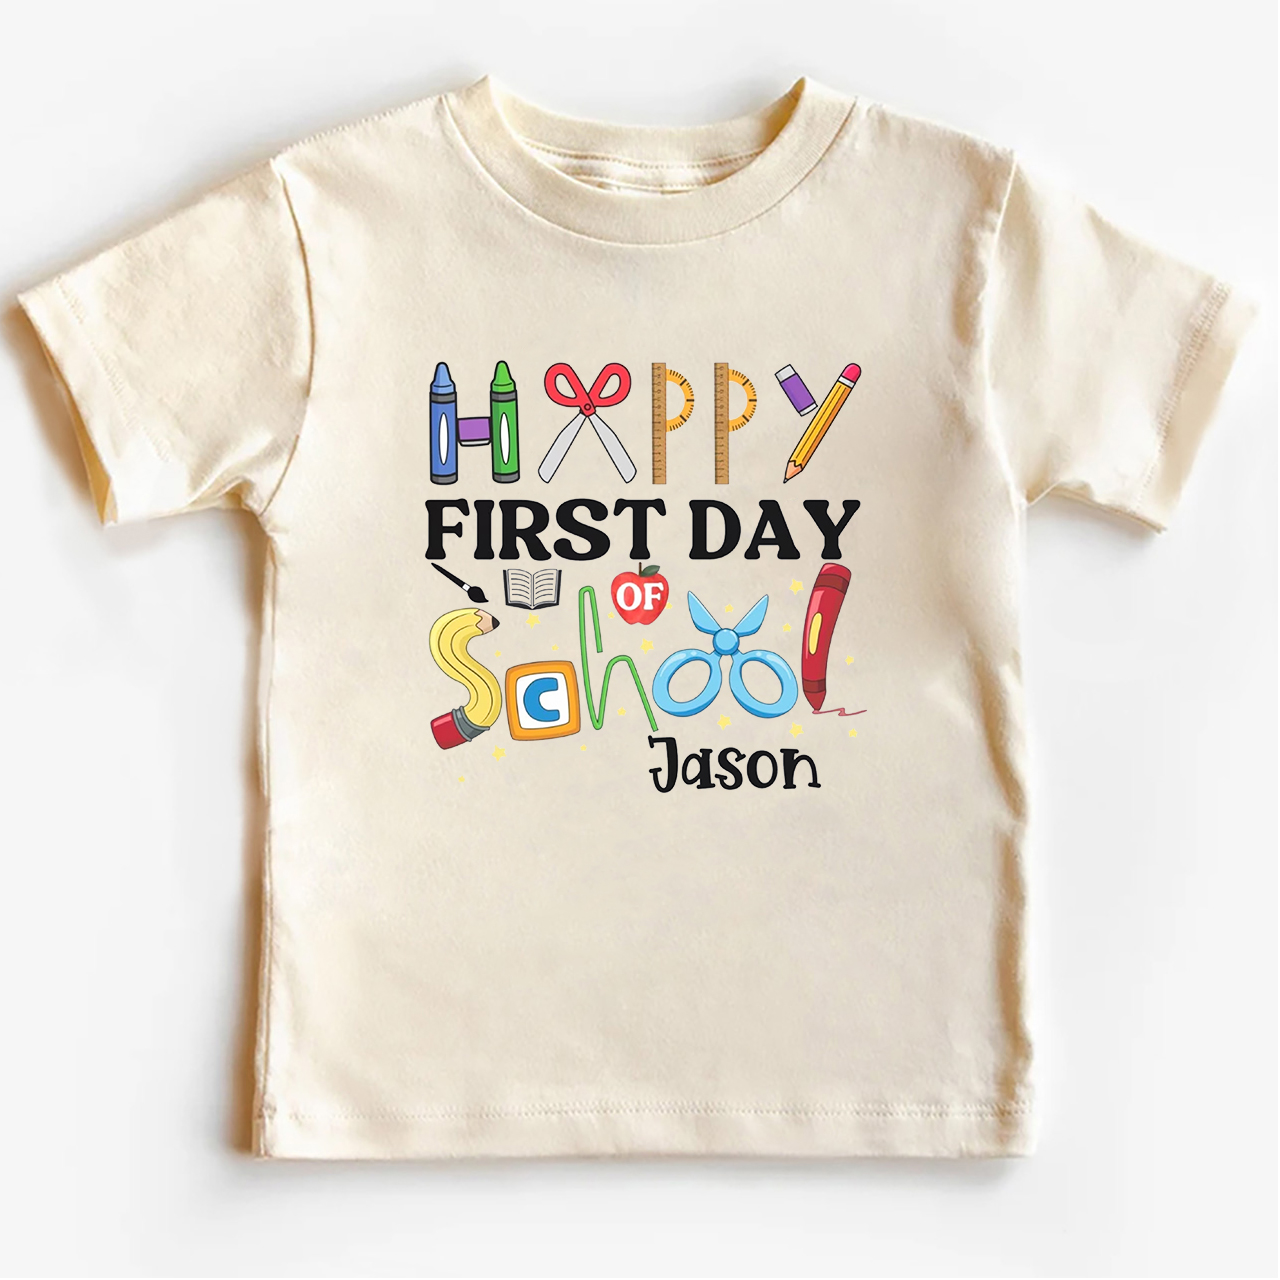 Personalized First Day of Shirt For School Kids